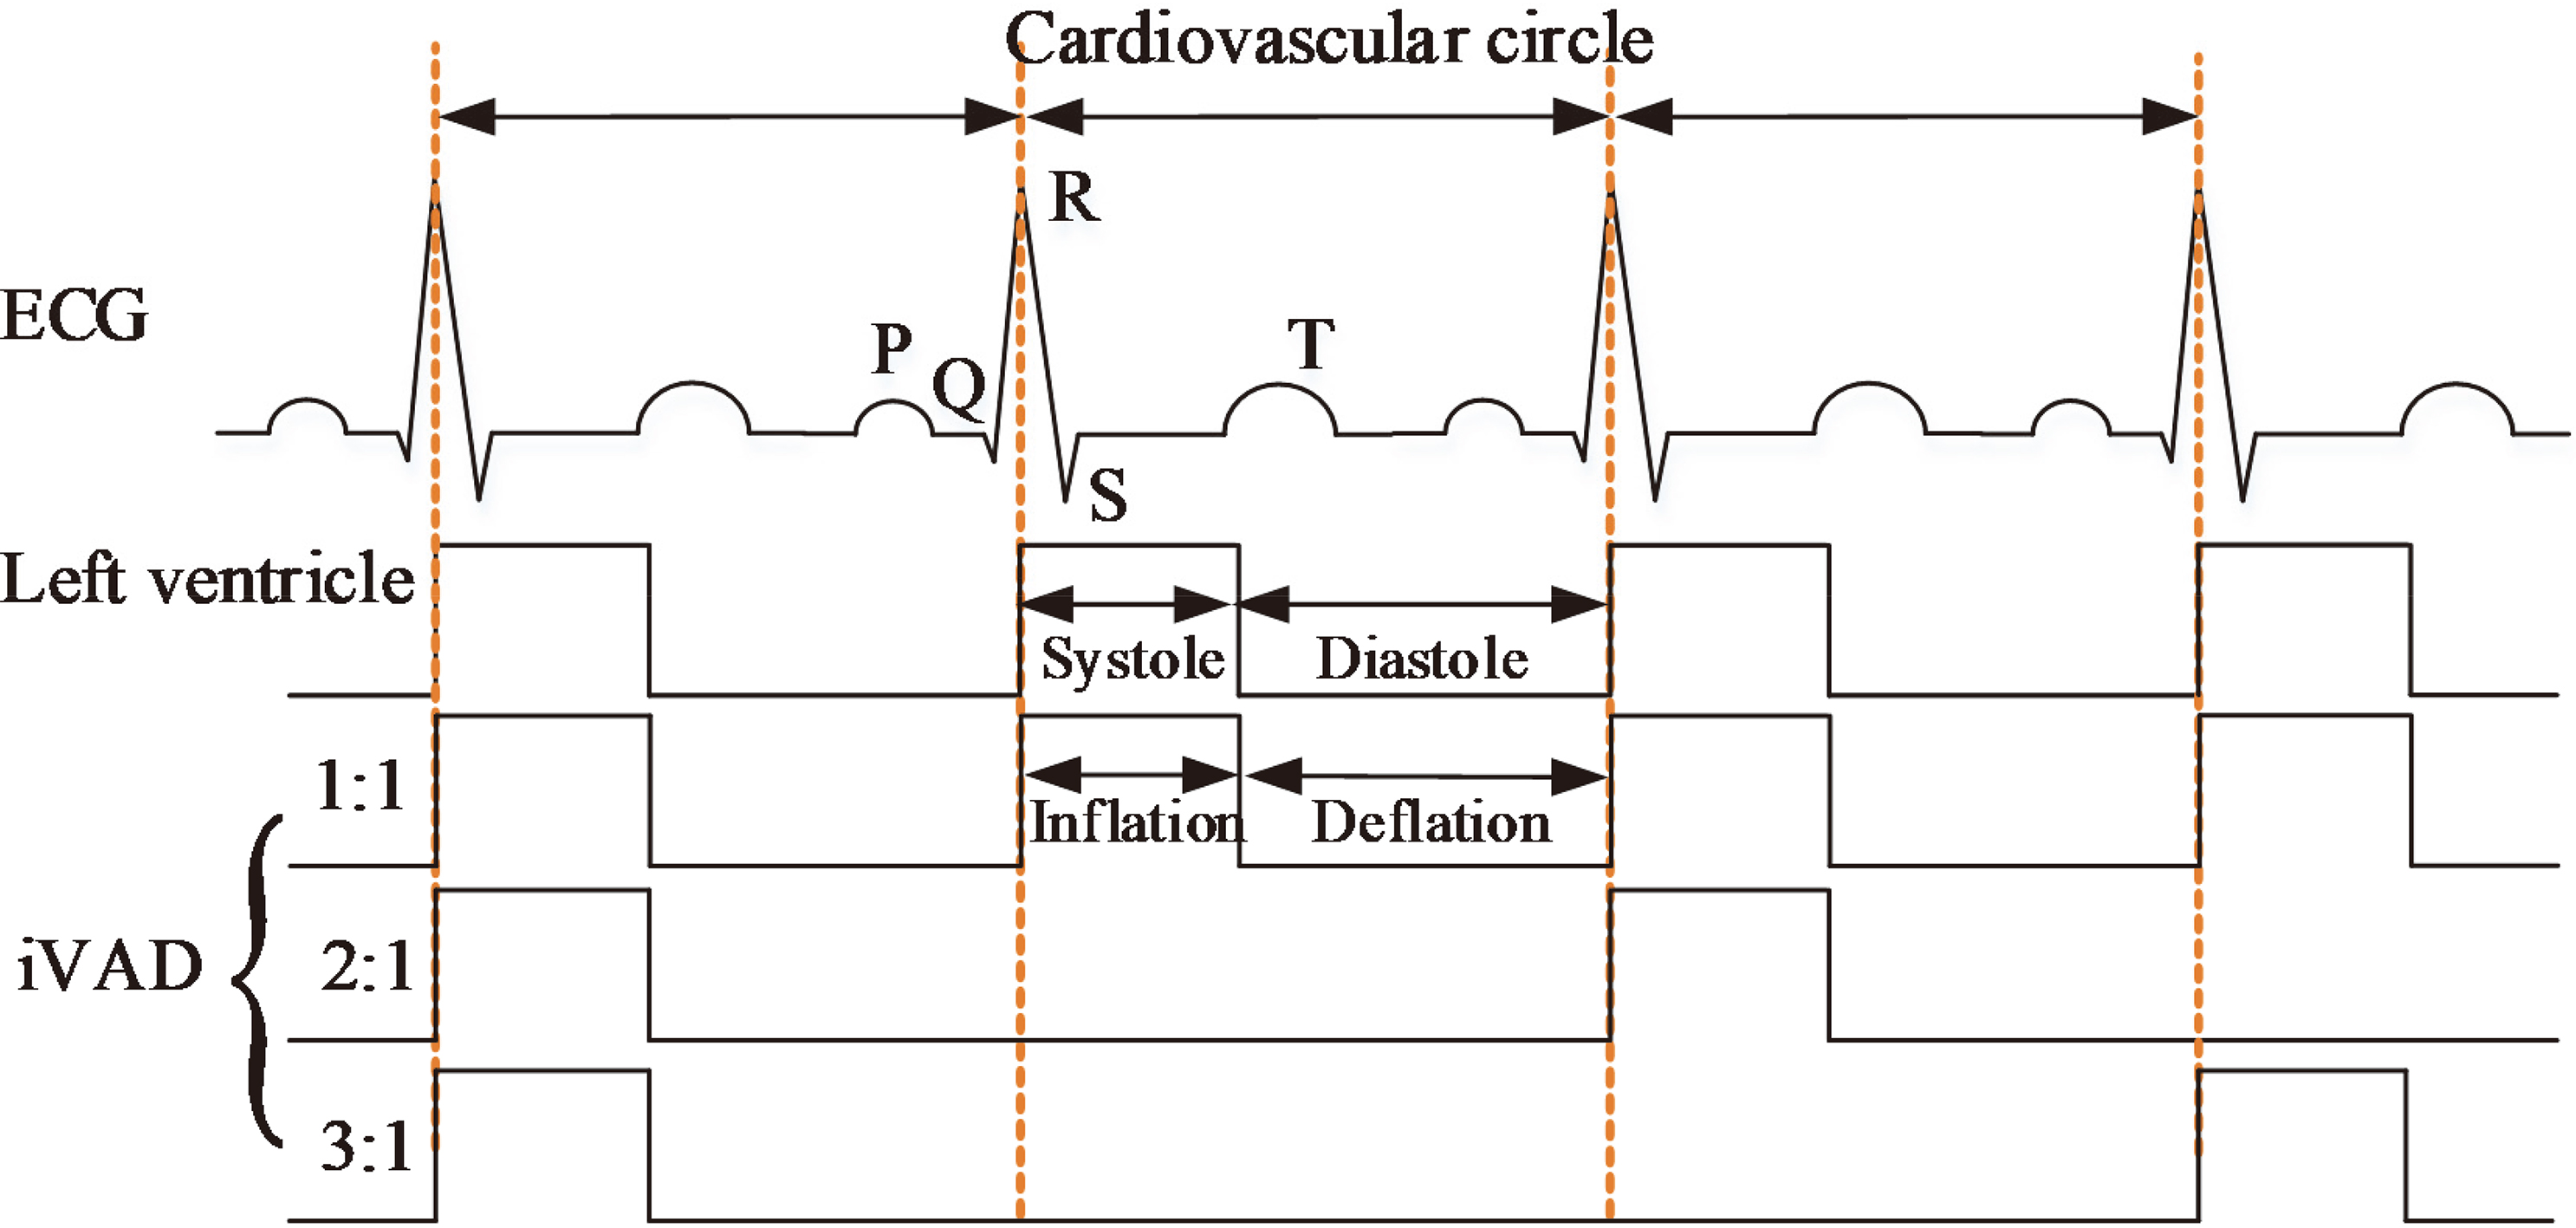 Illustration of the pulsatile rhythm of the left ventricle and the intra-ventricular assist device.